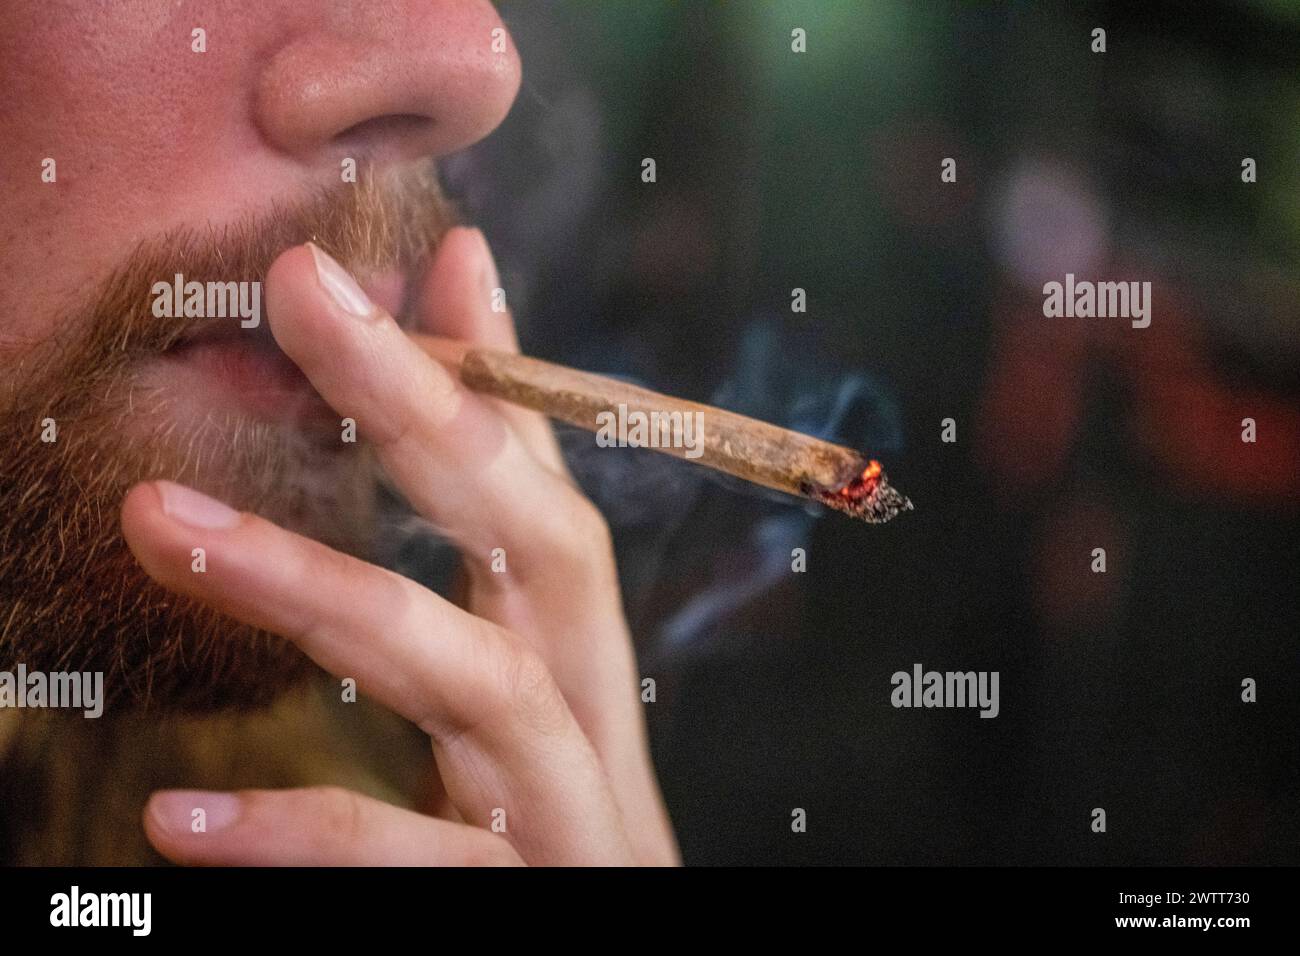 Closeup of a person smoking a rolled cigarette Stock Photo